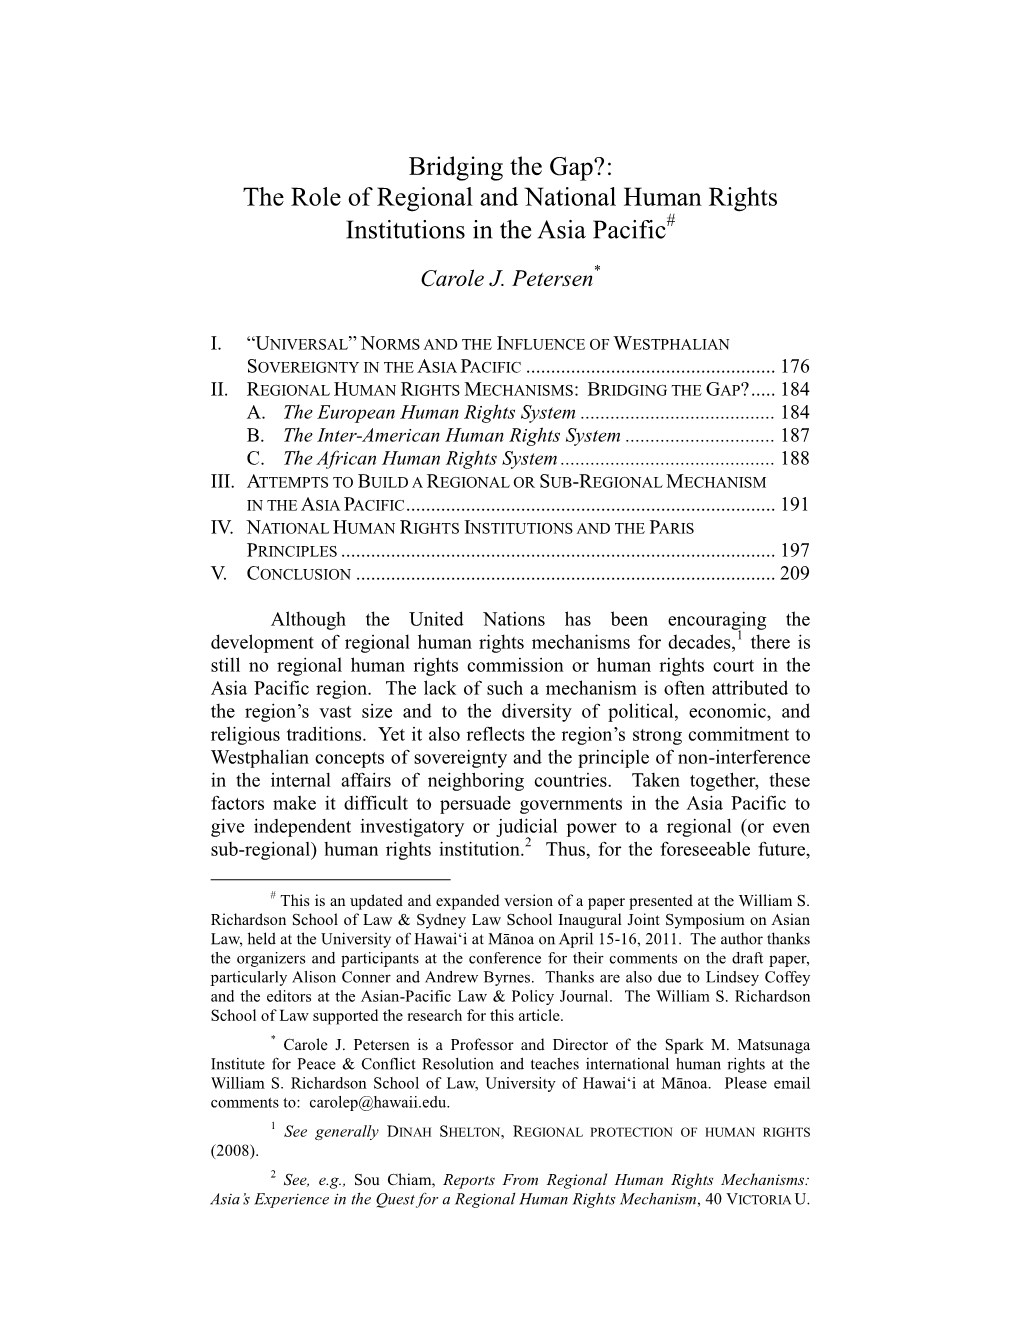 The Role of Regional and National Human Rights Institutions in the Asia Pacific